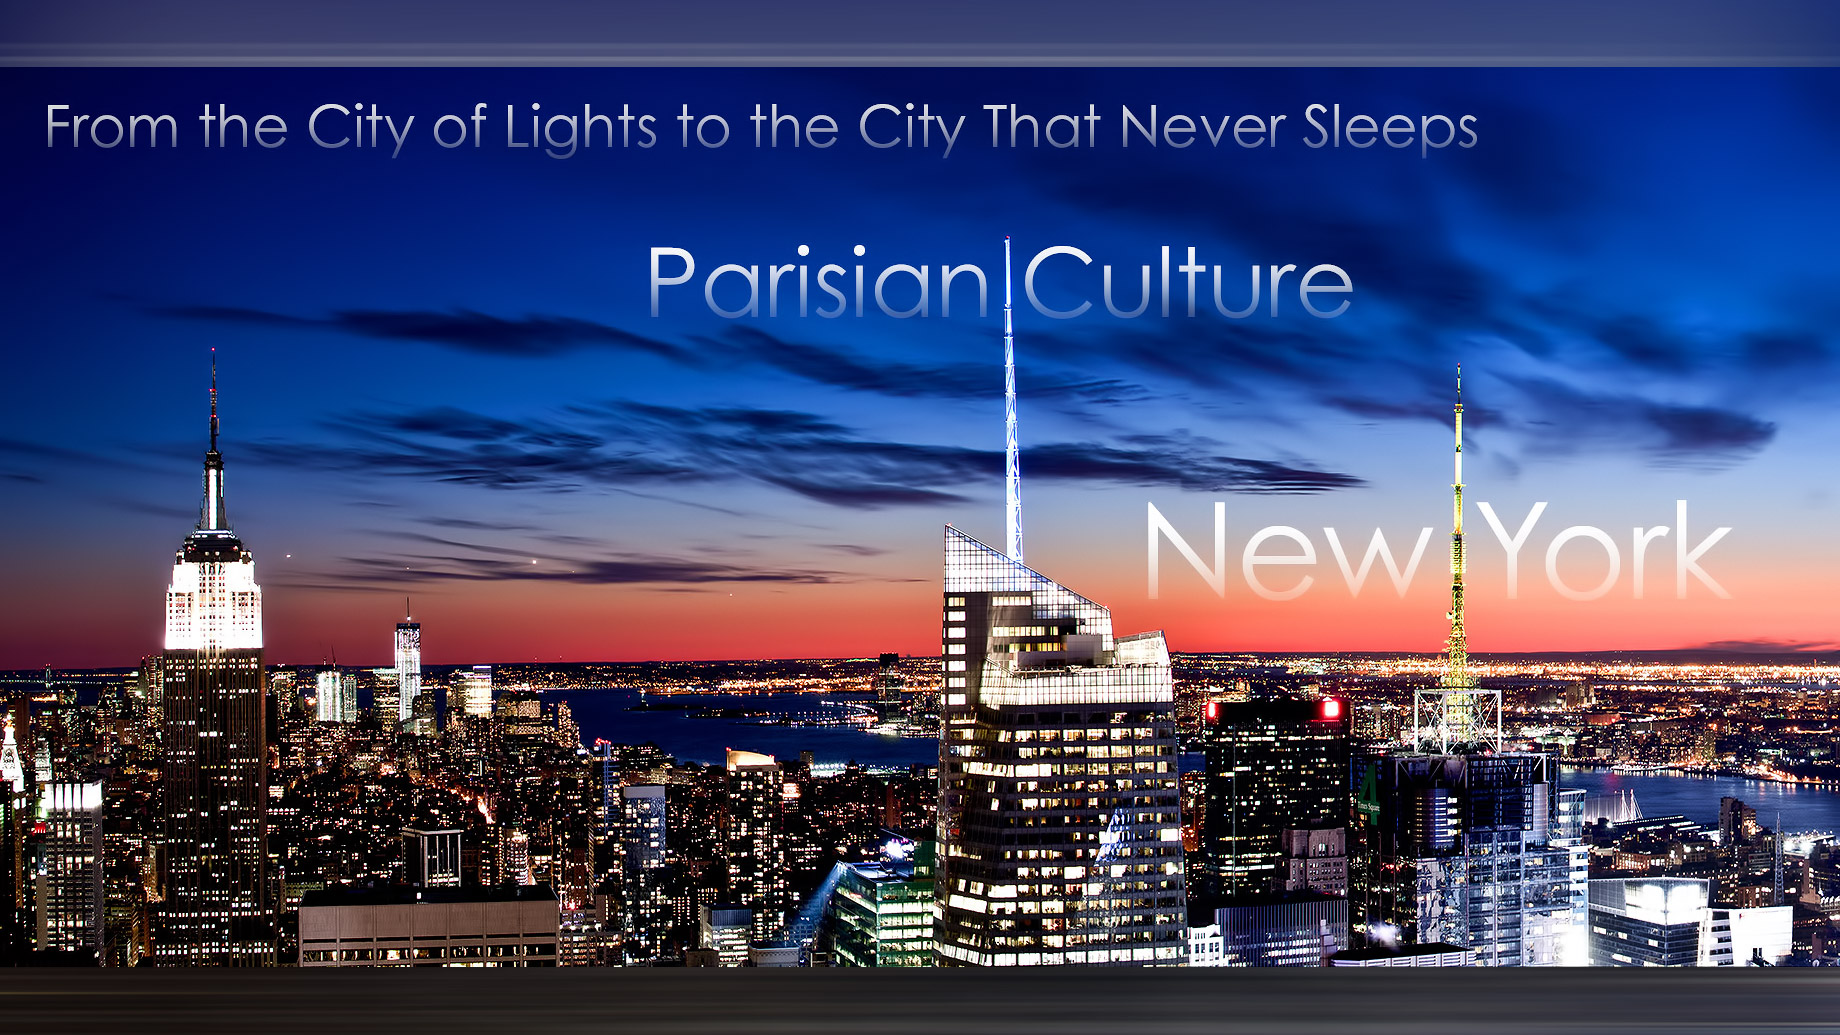 From the City of Lights to the City That Never Sleeps - Parisian Culture in New York